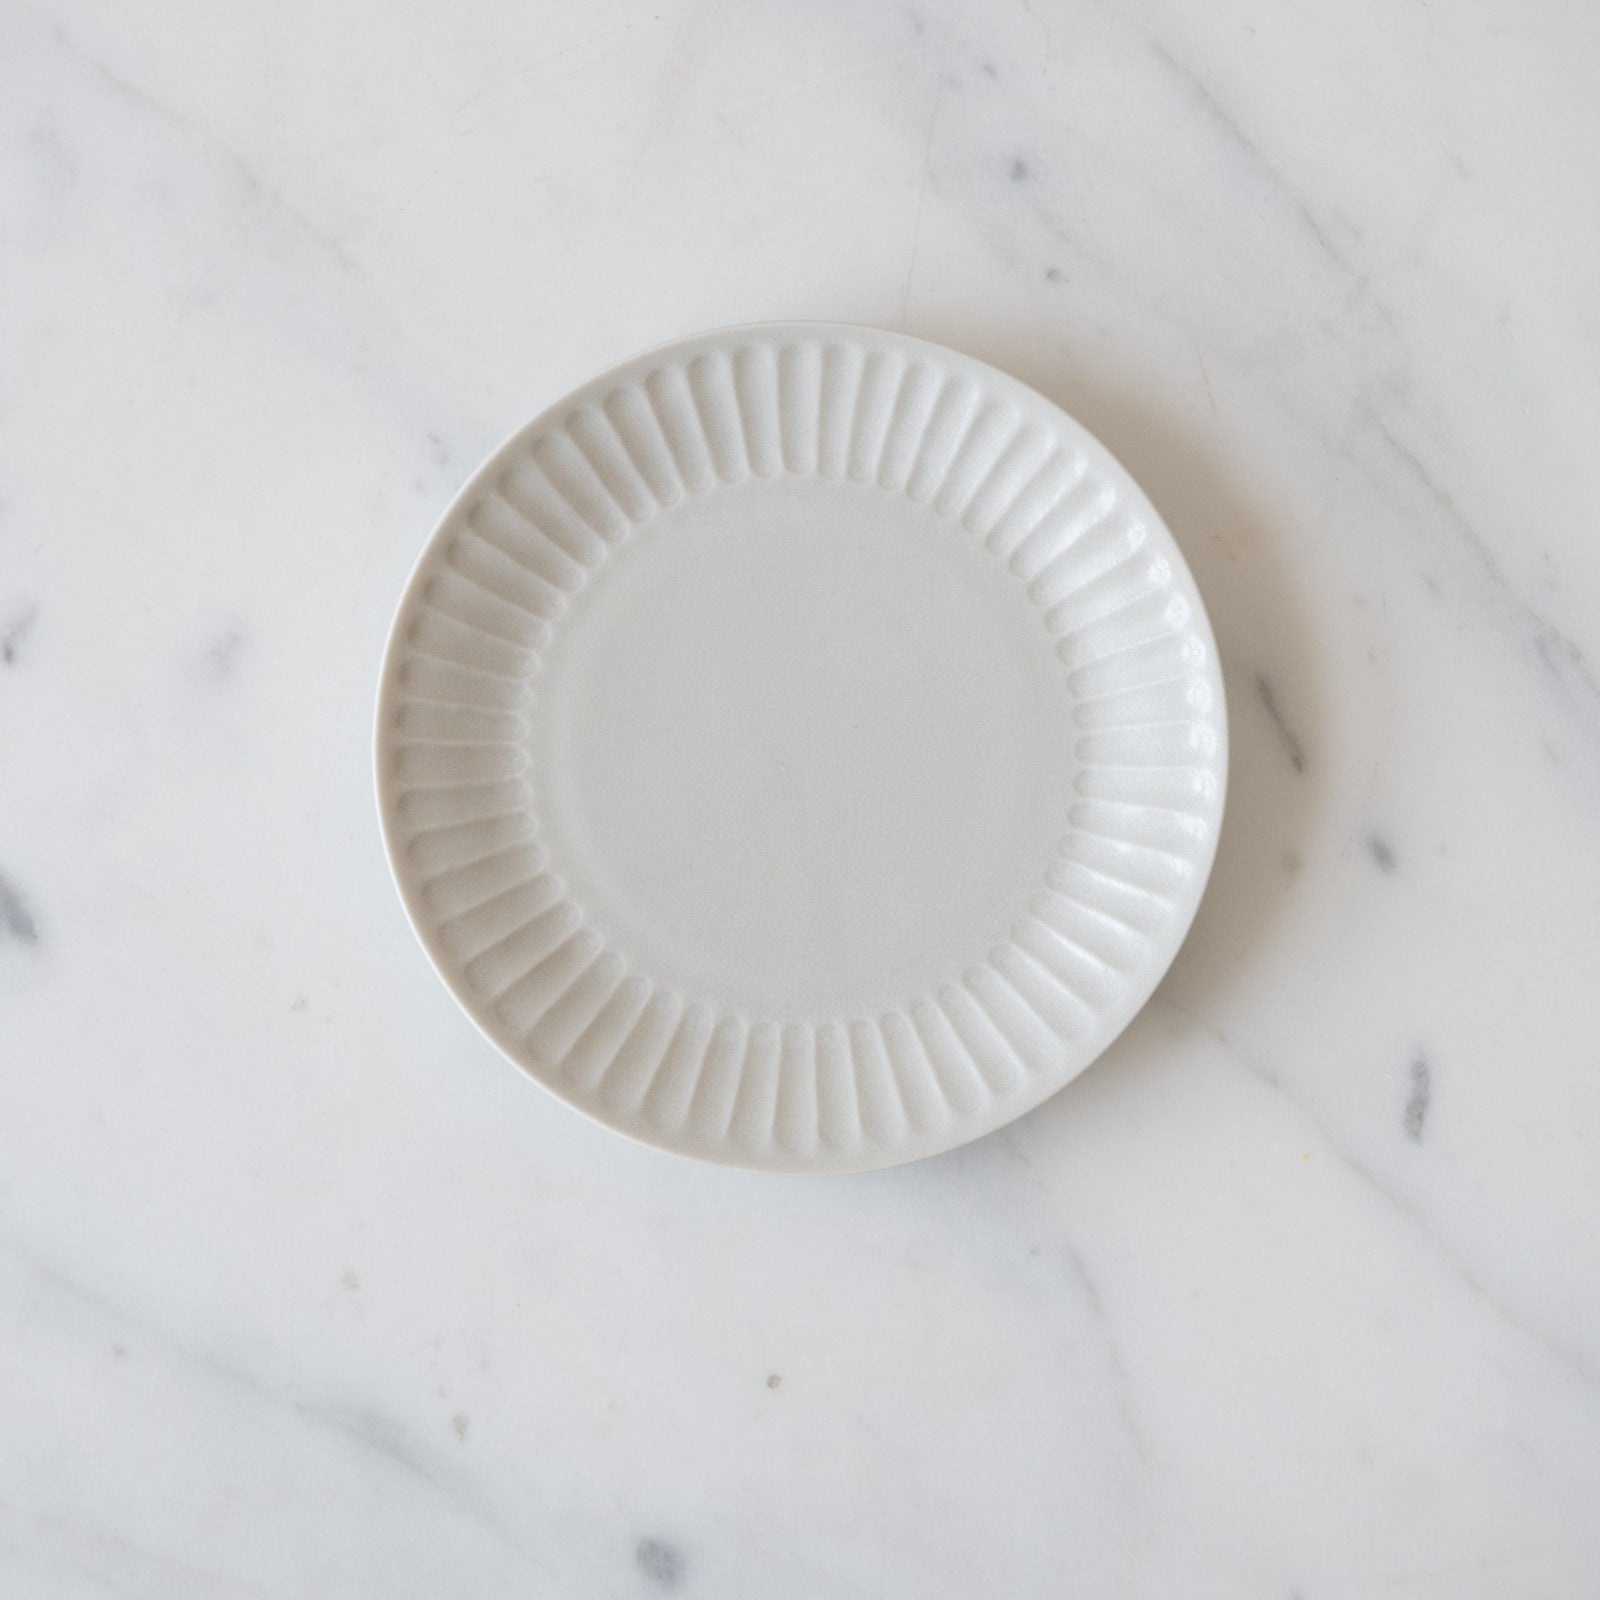 Japanese Fluted Plate - 3 sizes